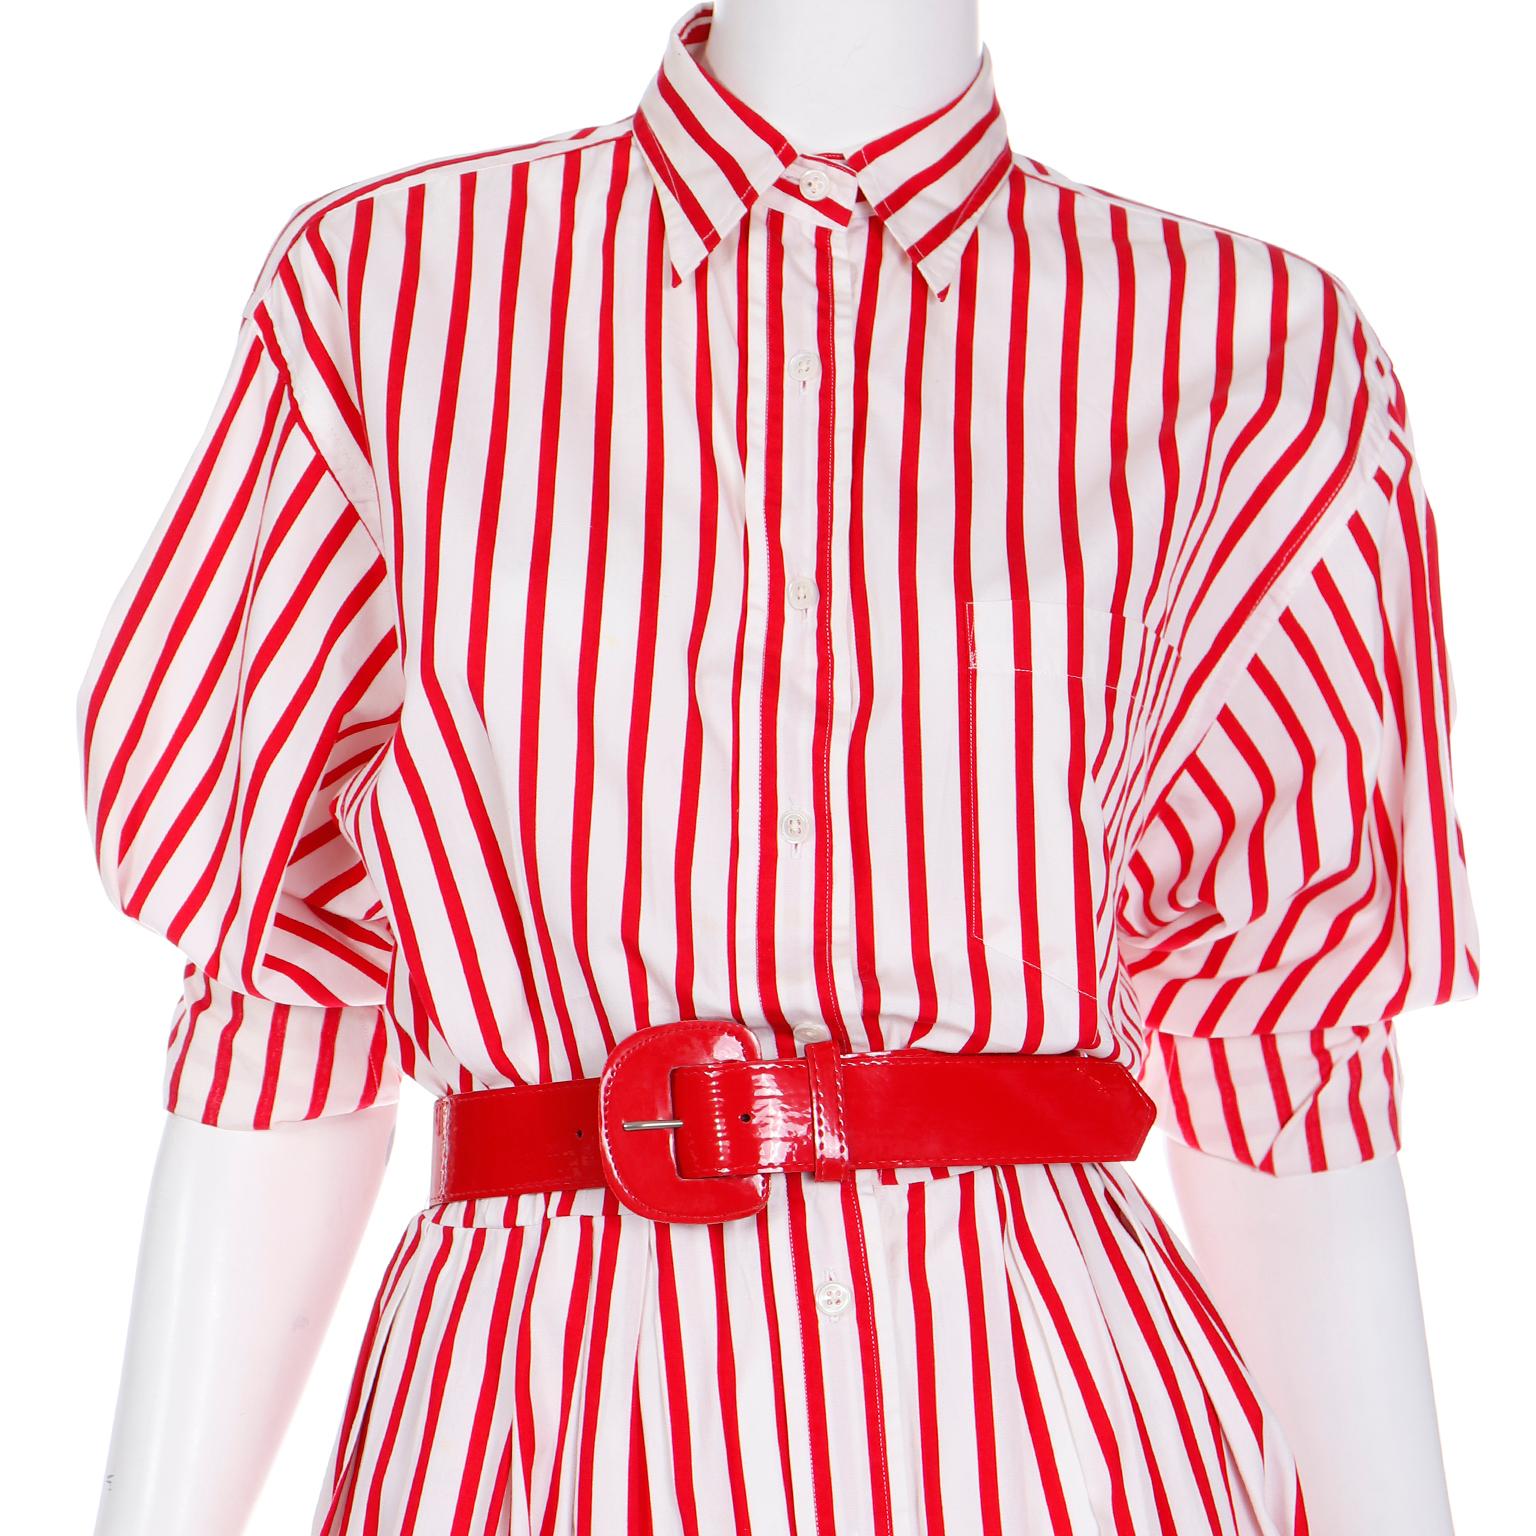 Vintage Ralph Lauren Red & White Striped Shirtdress Style Cotton Day Dress For Sale 4